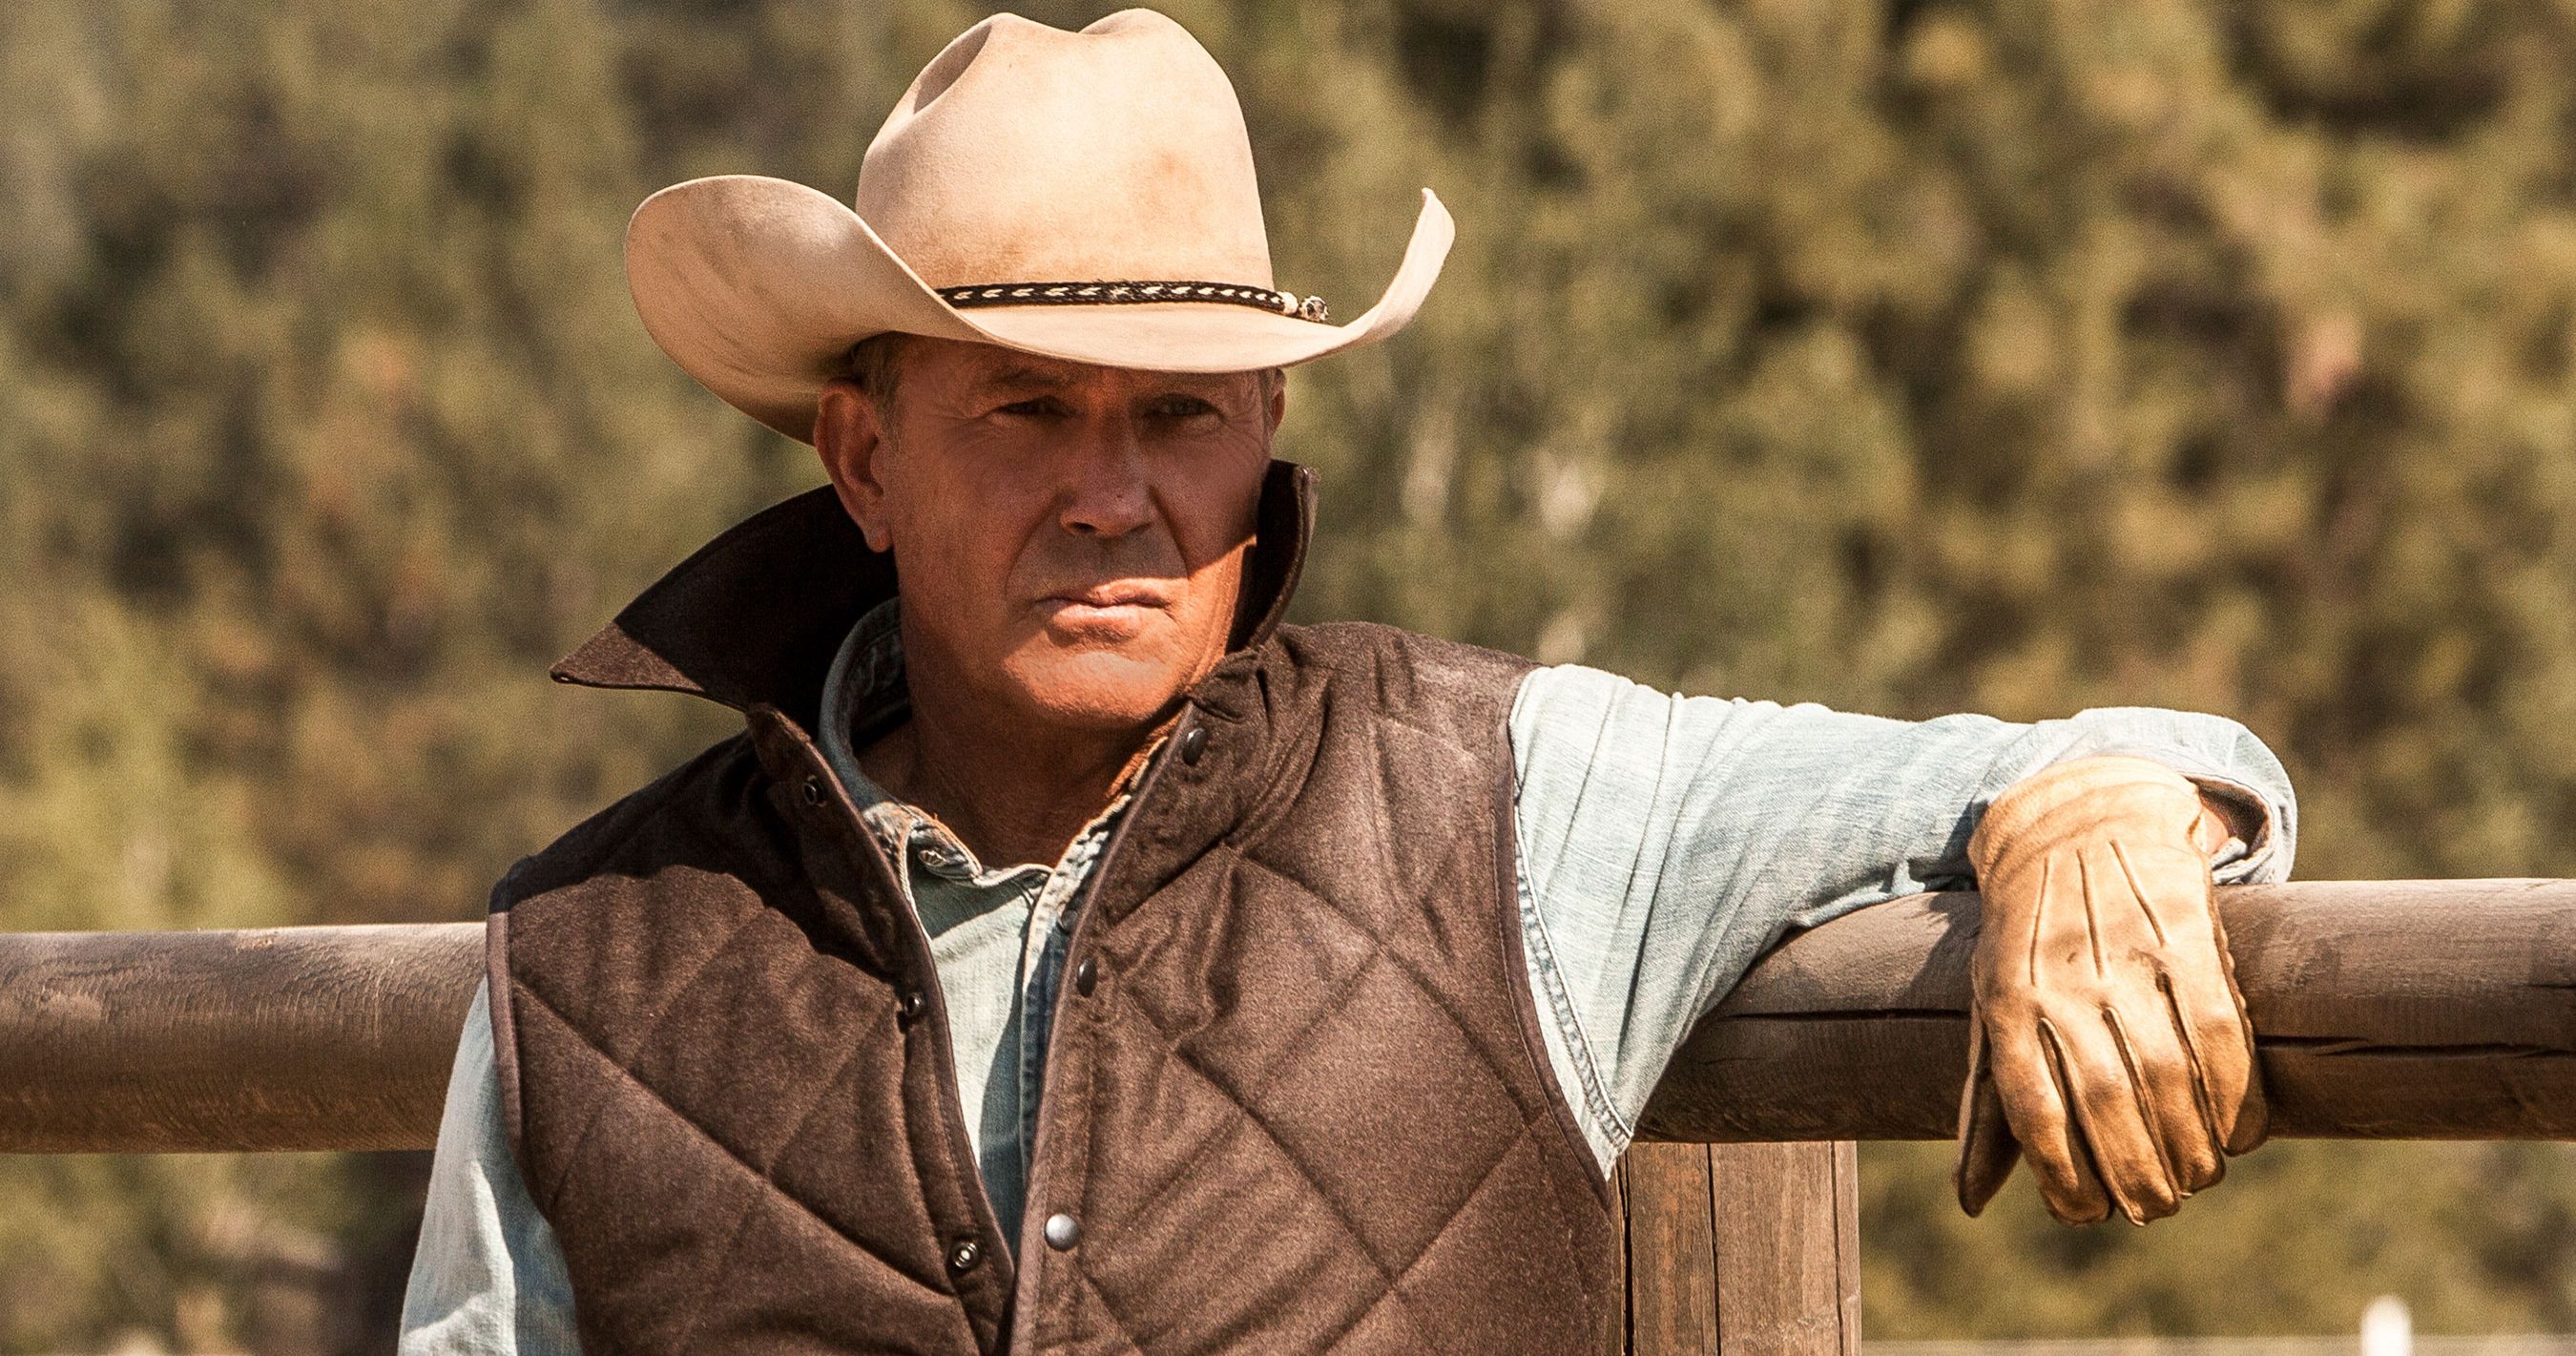 Yellowstone Season 2 Get Blu-ray, DVD Release Gets 45 Minutes of Unseen Extras